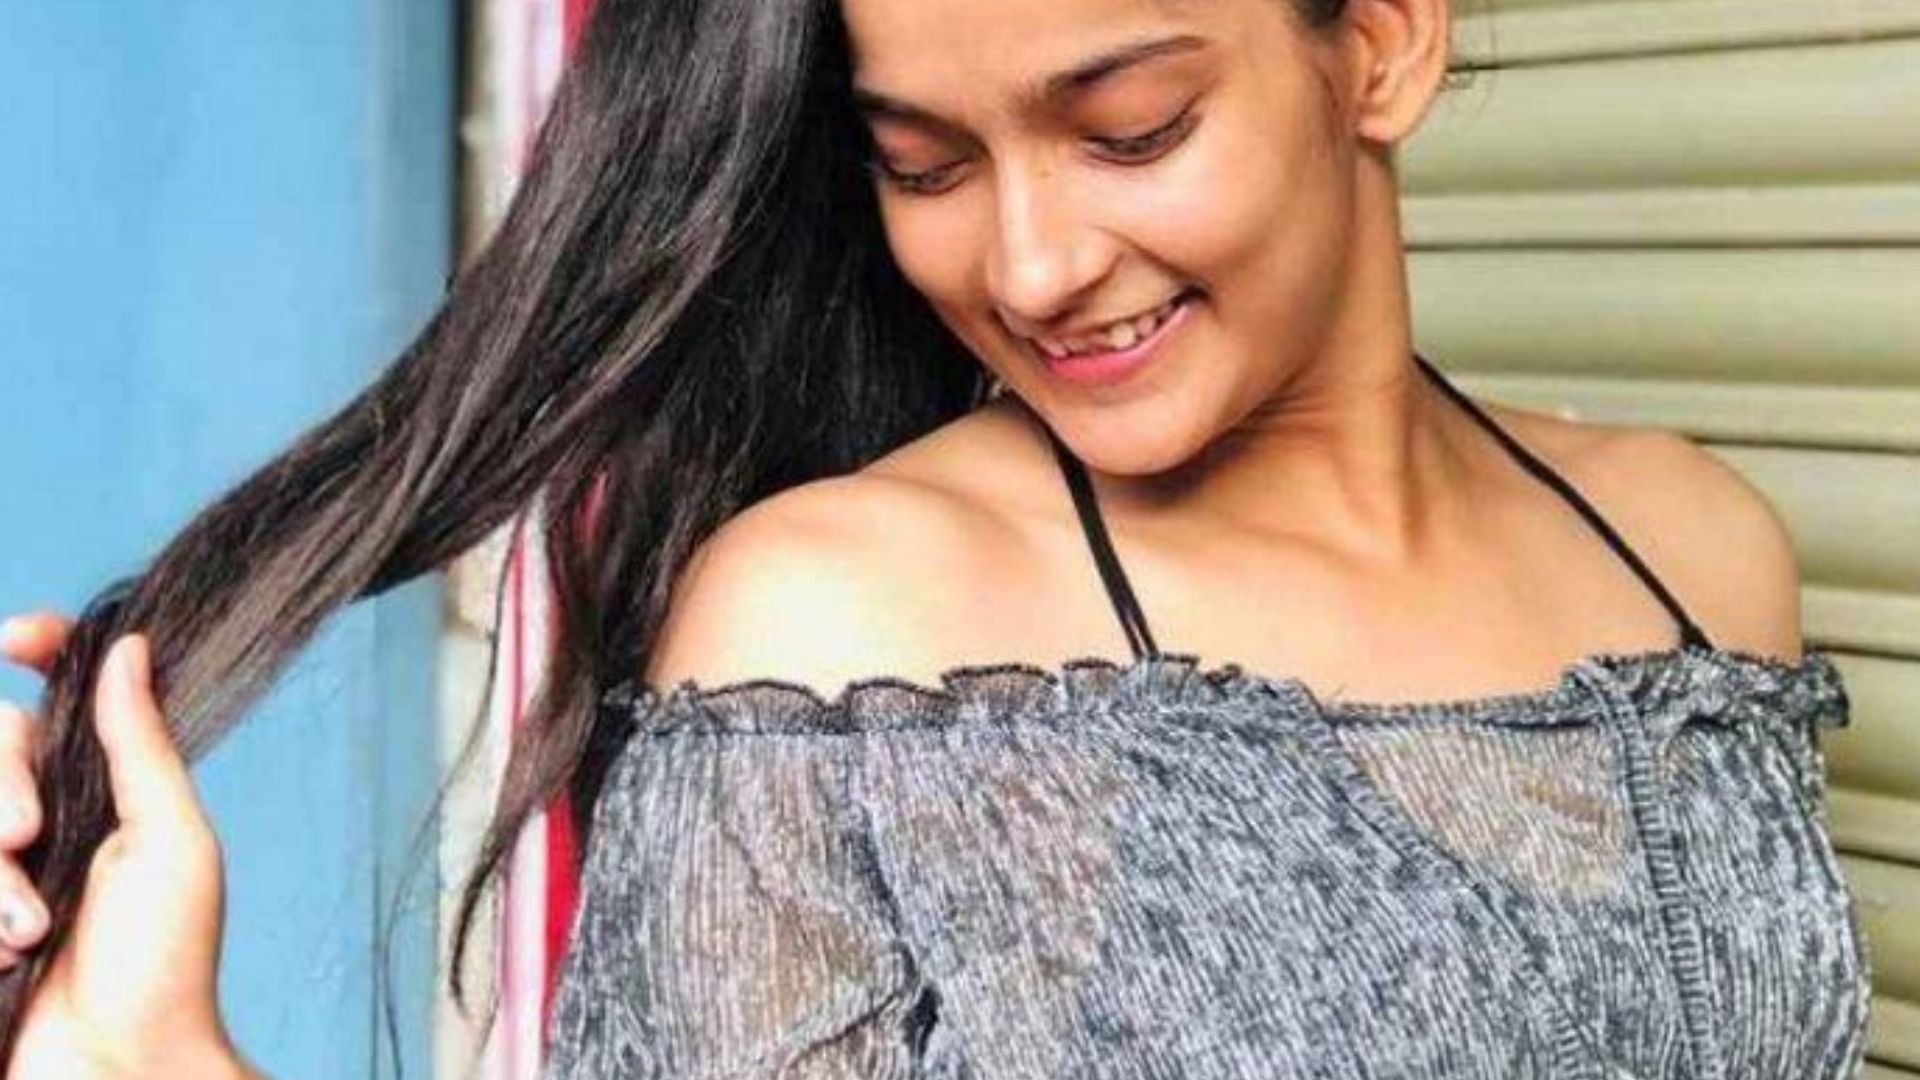 Vartika Jha Smiling And Holding Hair on Her Hand